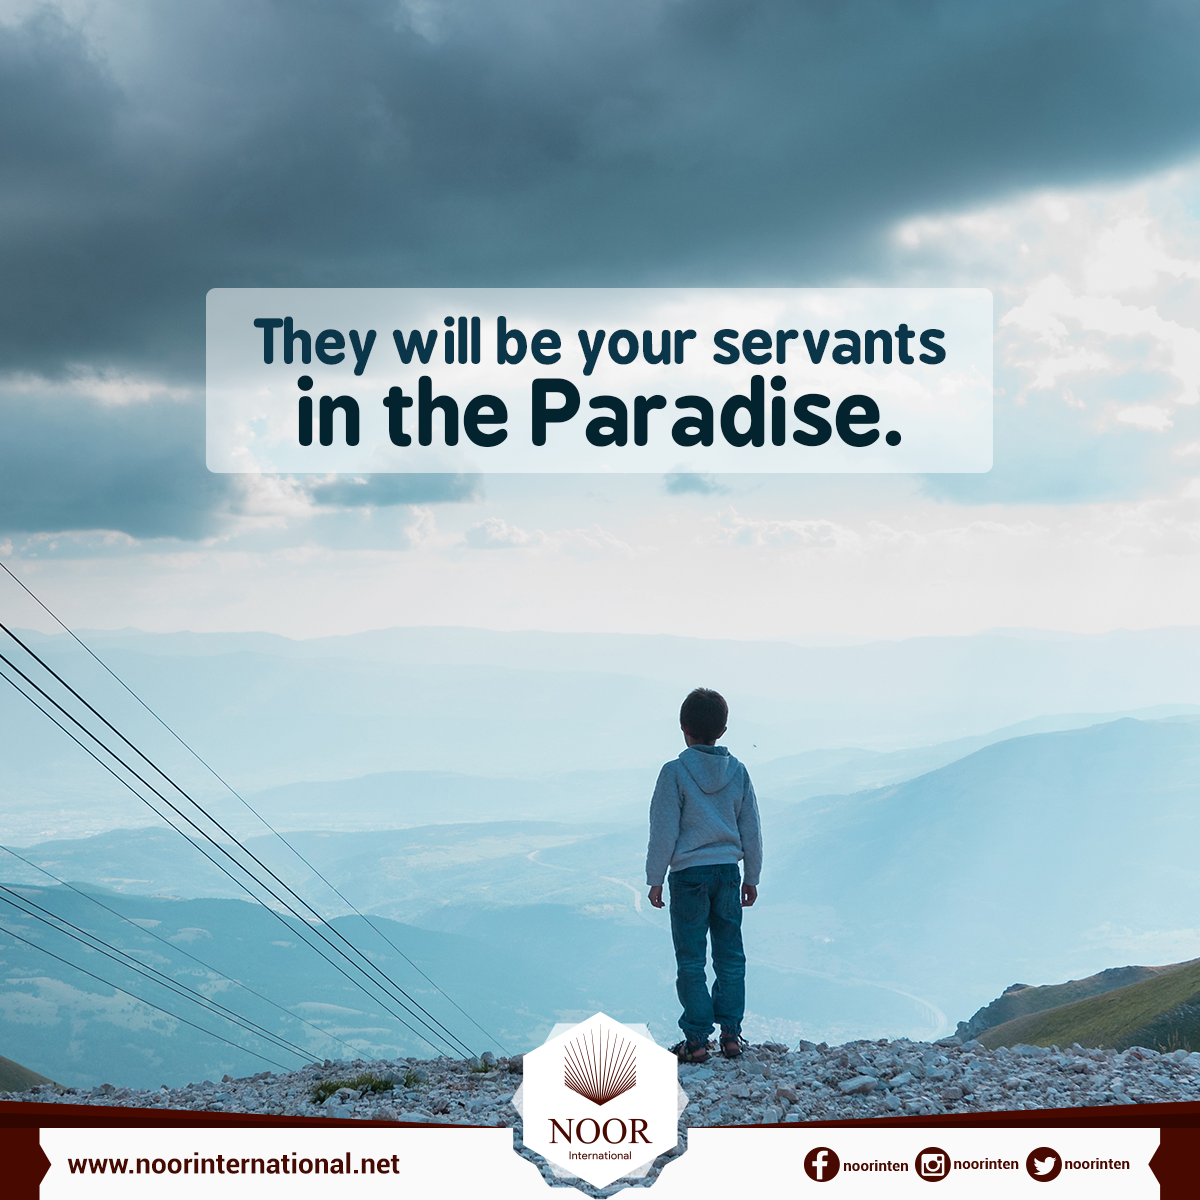 They will be your servants in the Paradise.